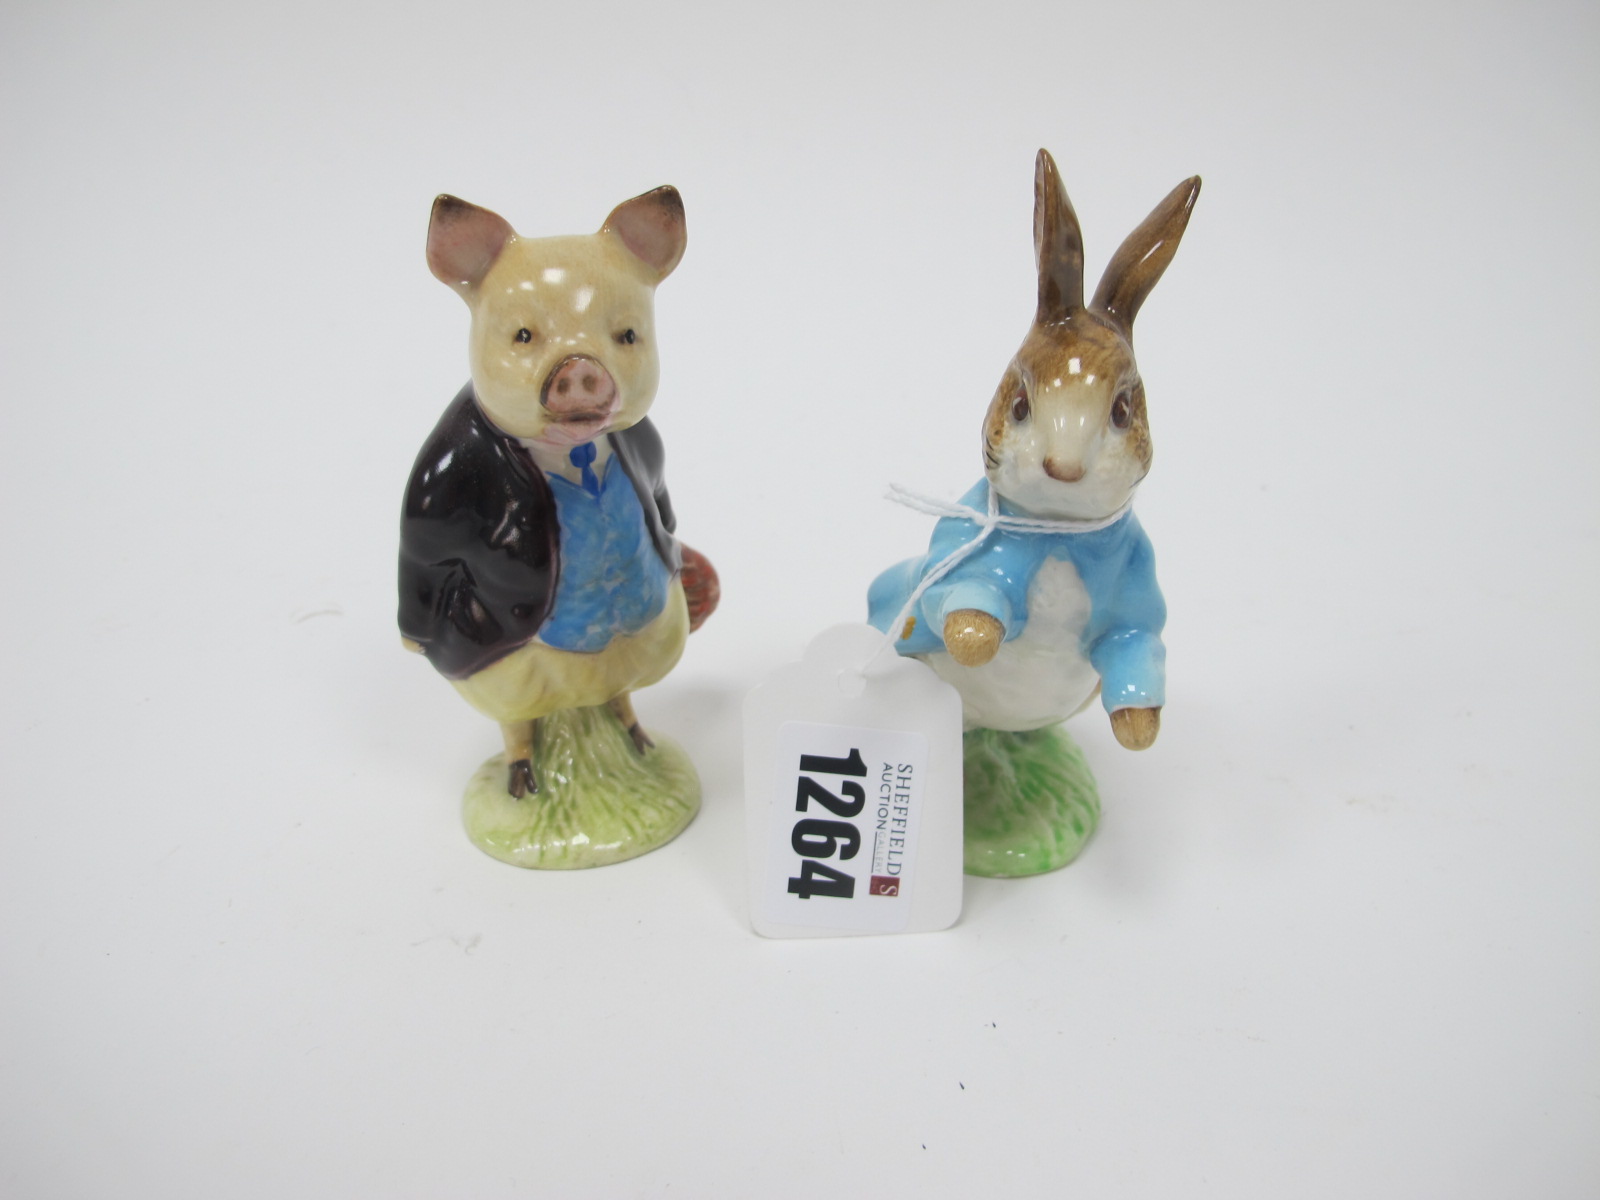 Beswick Beatrix Potter Figures - Pigling Bland, in maroon coat, and Peter Rabbit both gold